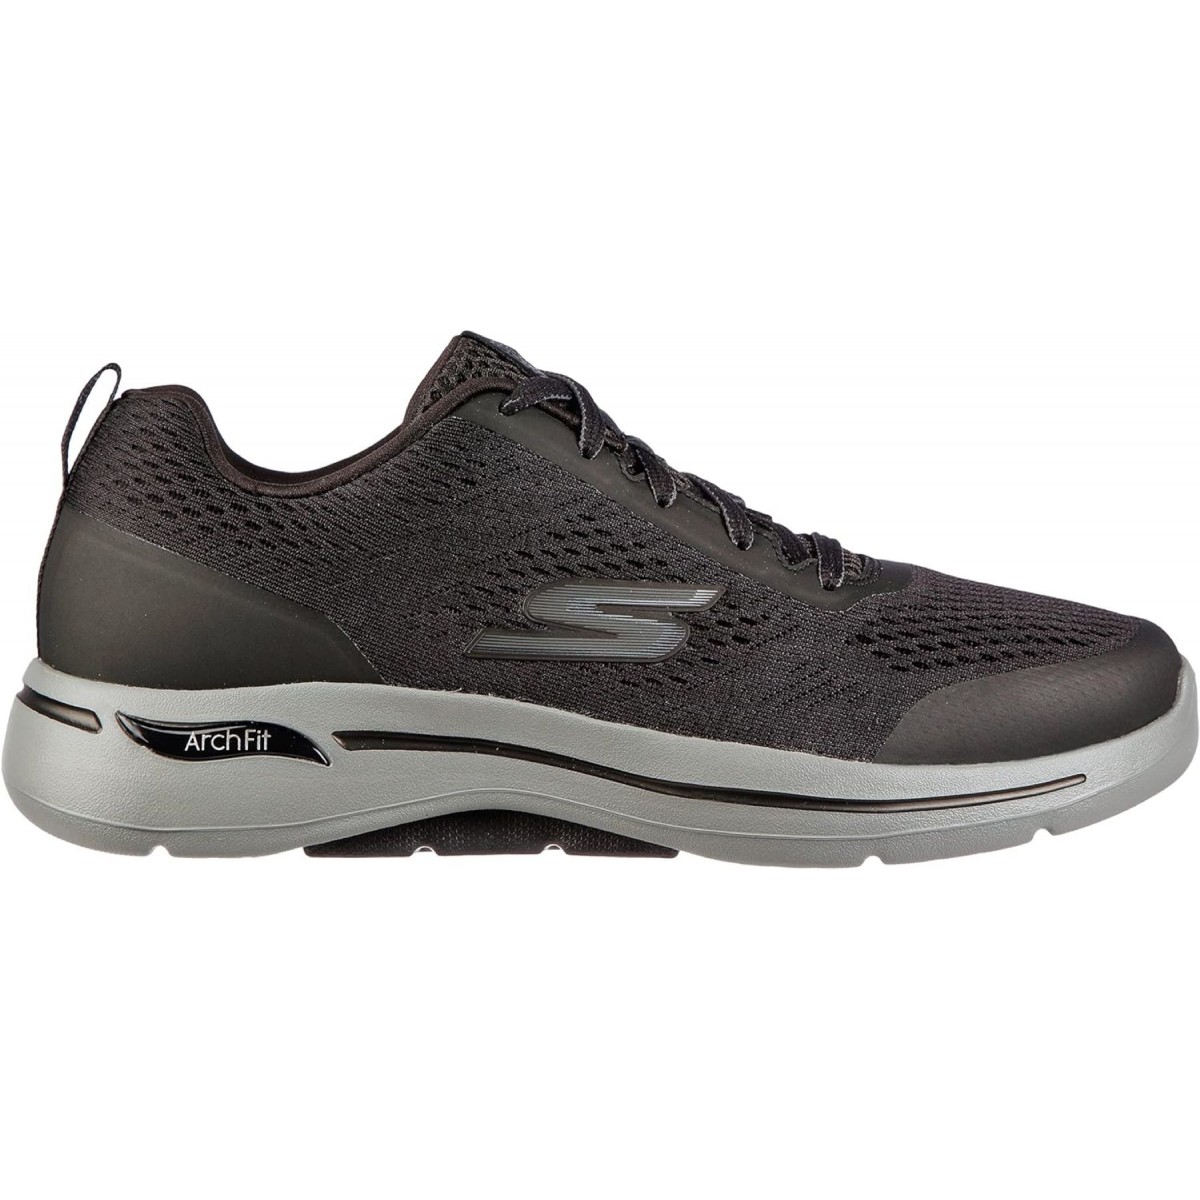 Skechers deportiva negro para hombre Arch Fit 216116